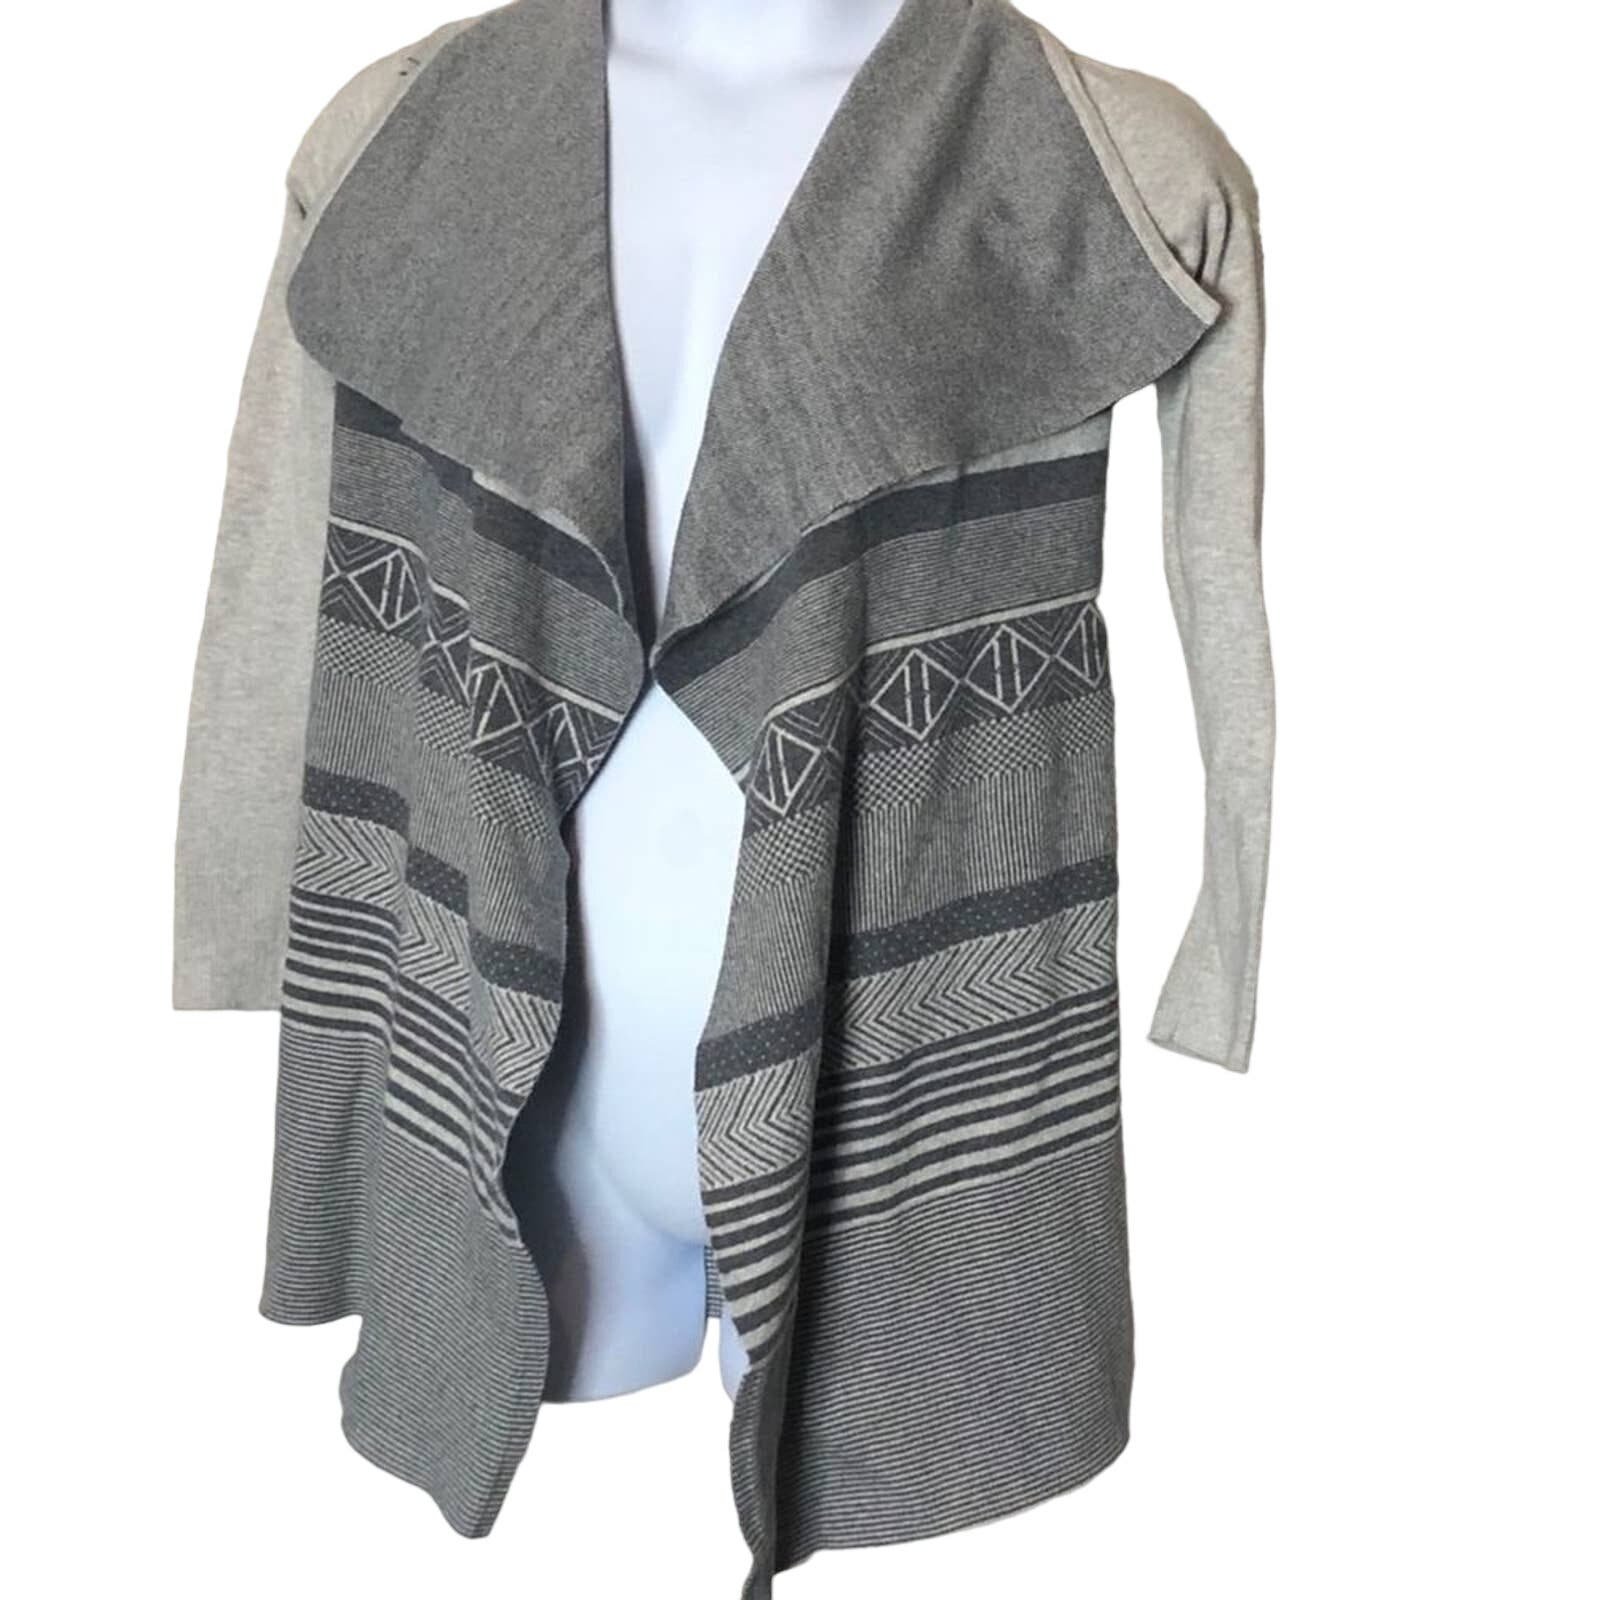 Special offer  Anthropologie ruby moon Grey Drape Open Front Cardigan size Medium I7PP9HkqN Cool